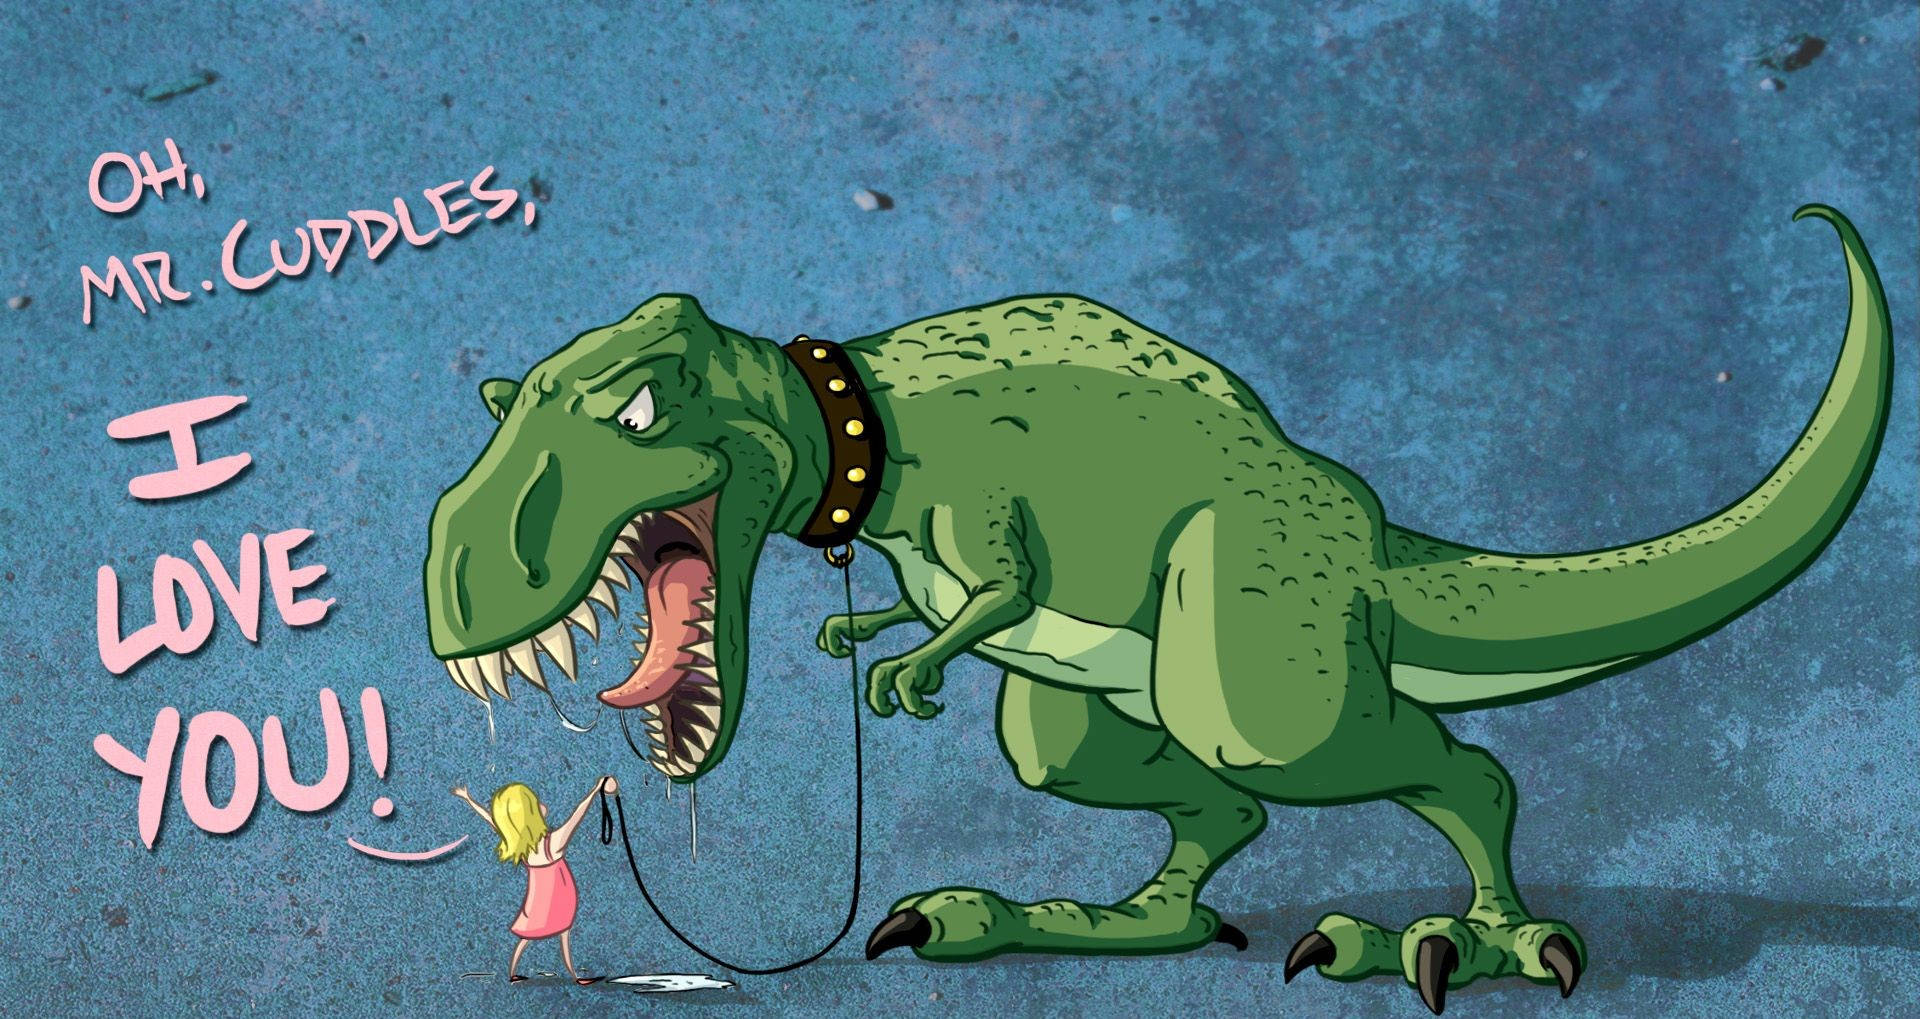 This funny-looking dinosaur is making us laugh! Wallpaper